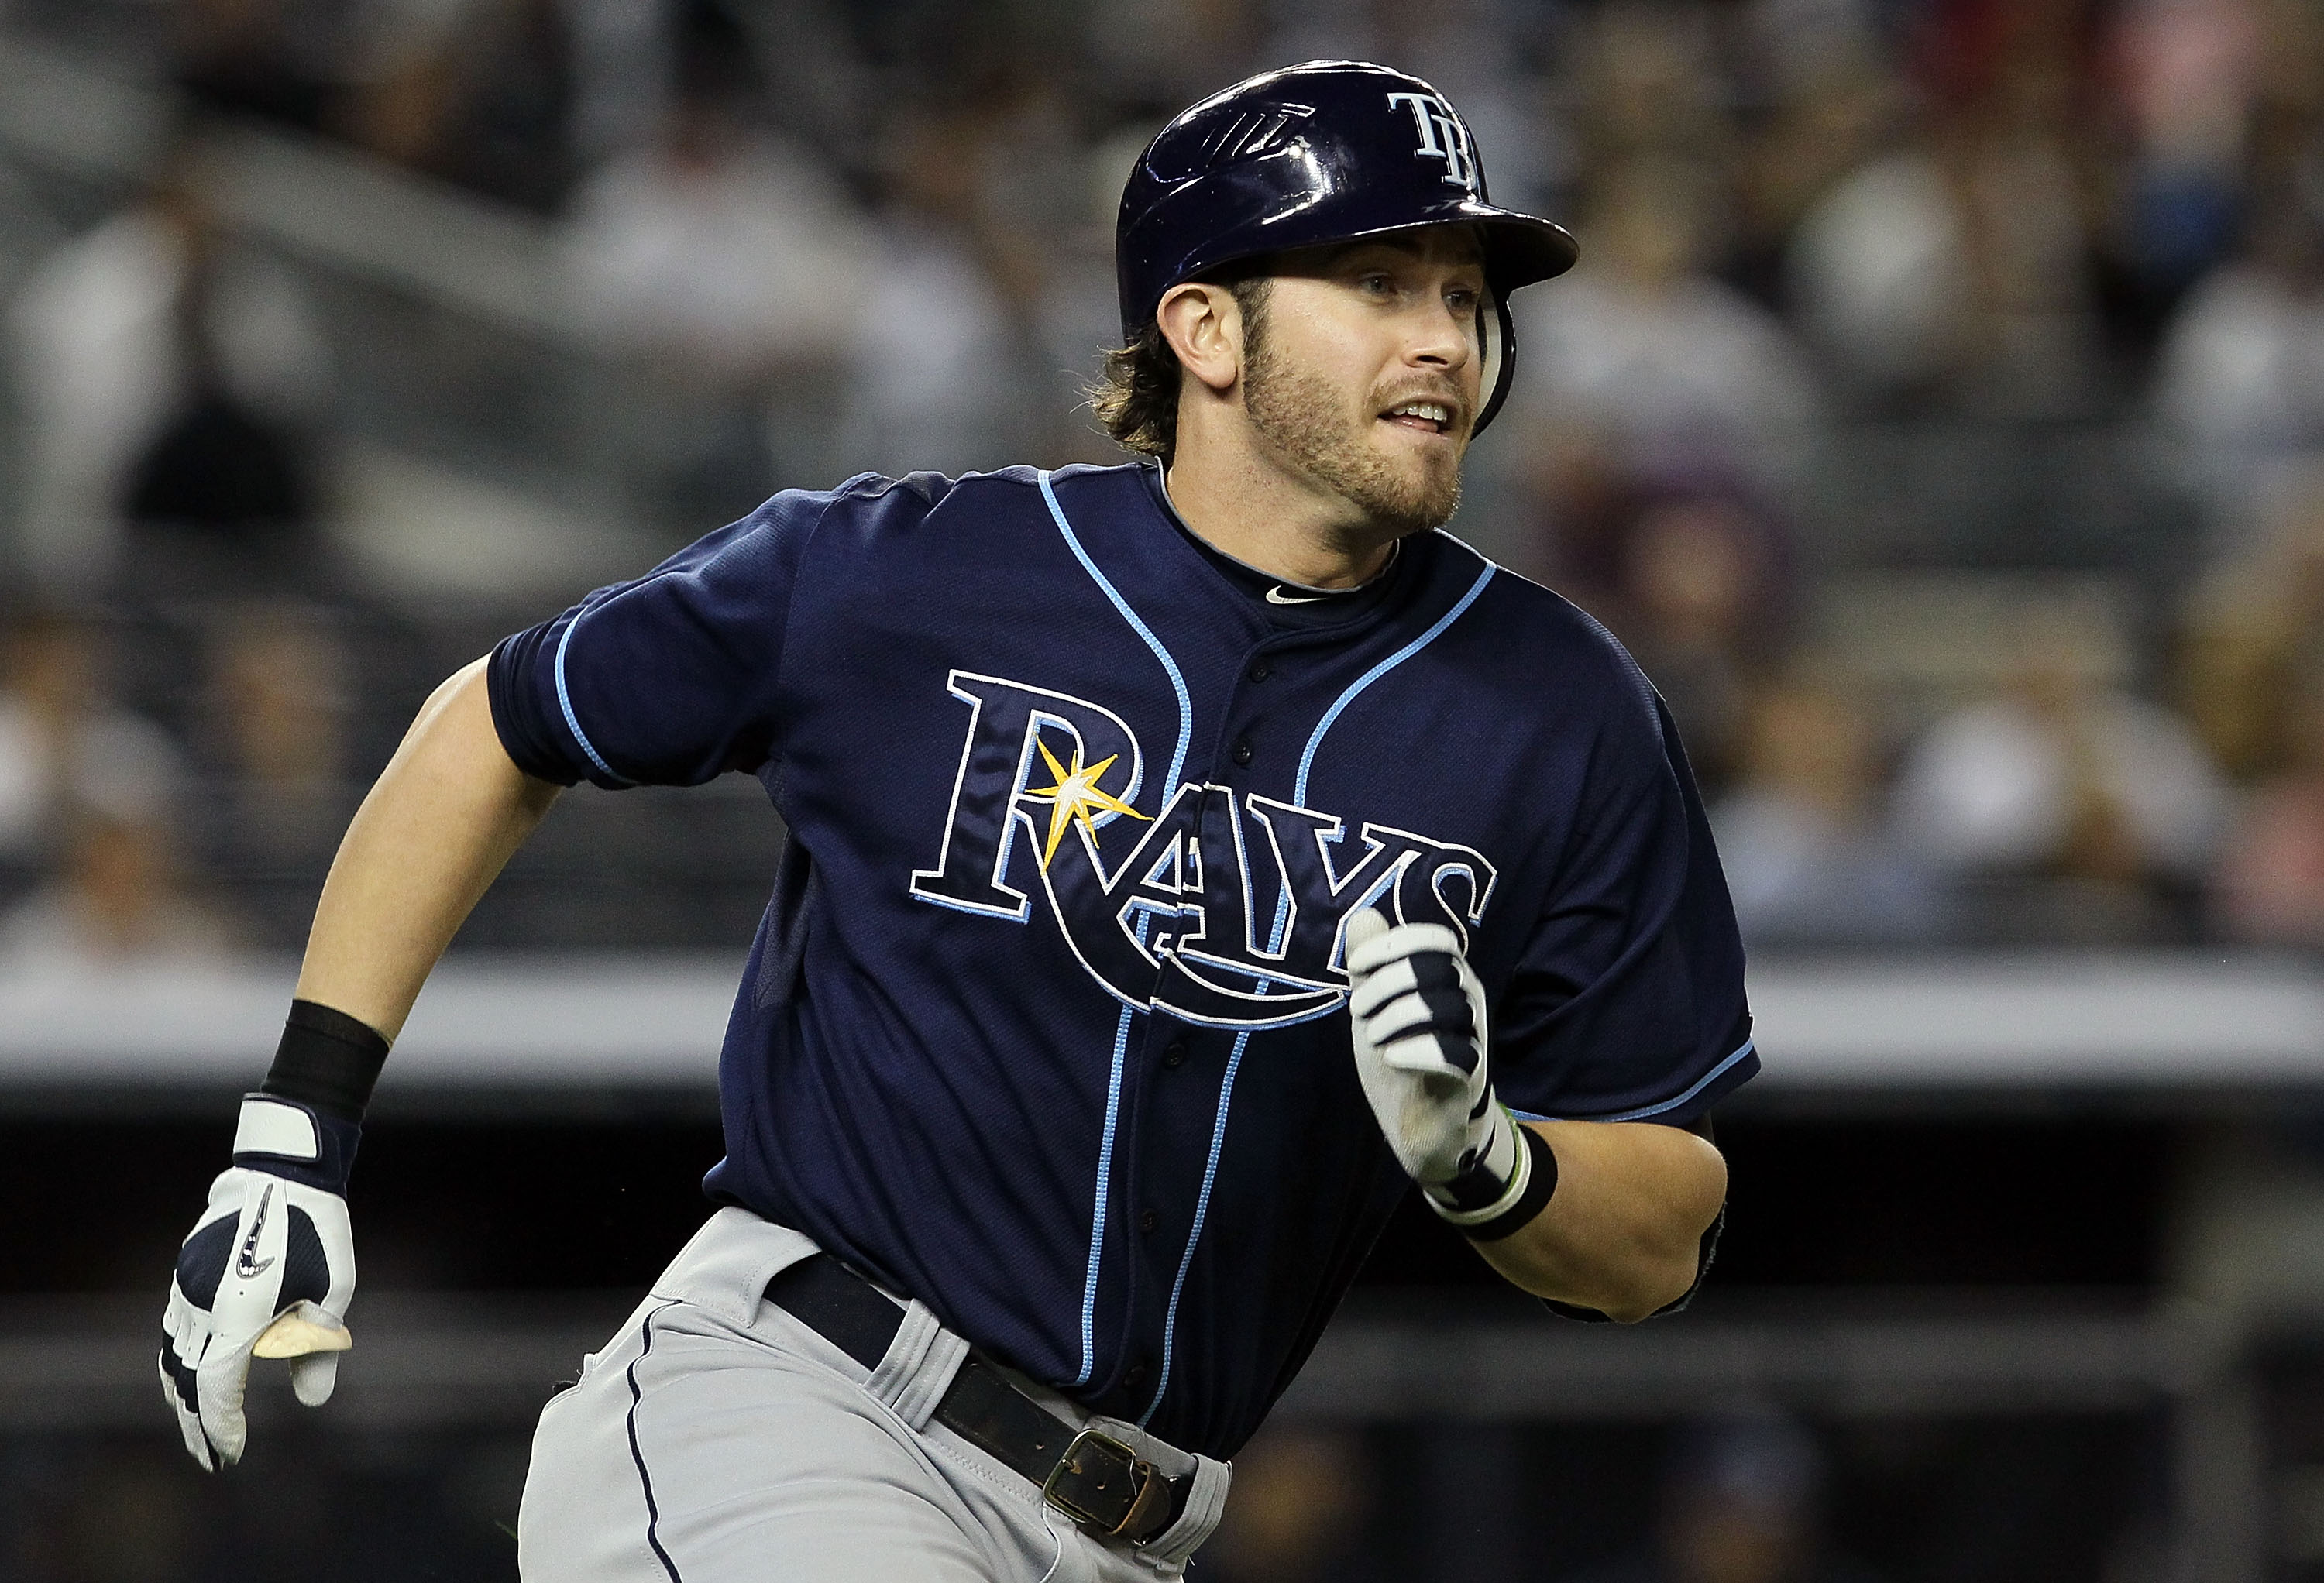 NEW YORK - SEPTEMBER 20:  Evan Longoria #3 of the Tampa Bay Rays runs to first base after his ninth inning RBI single against the New York Yankees on September 20, 2010 at Yankee Stadium in the Bronx borough of New York City. The Yankees defeated the Rays